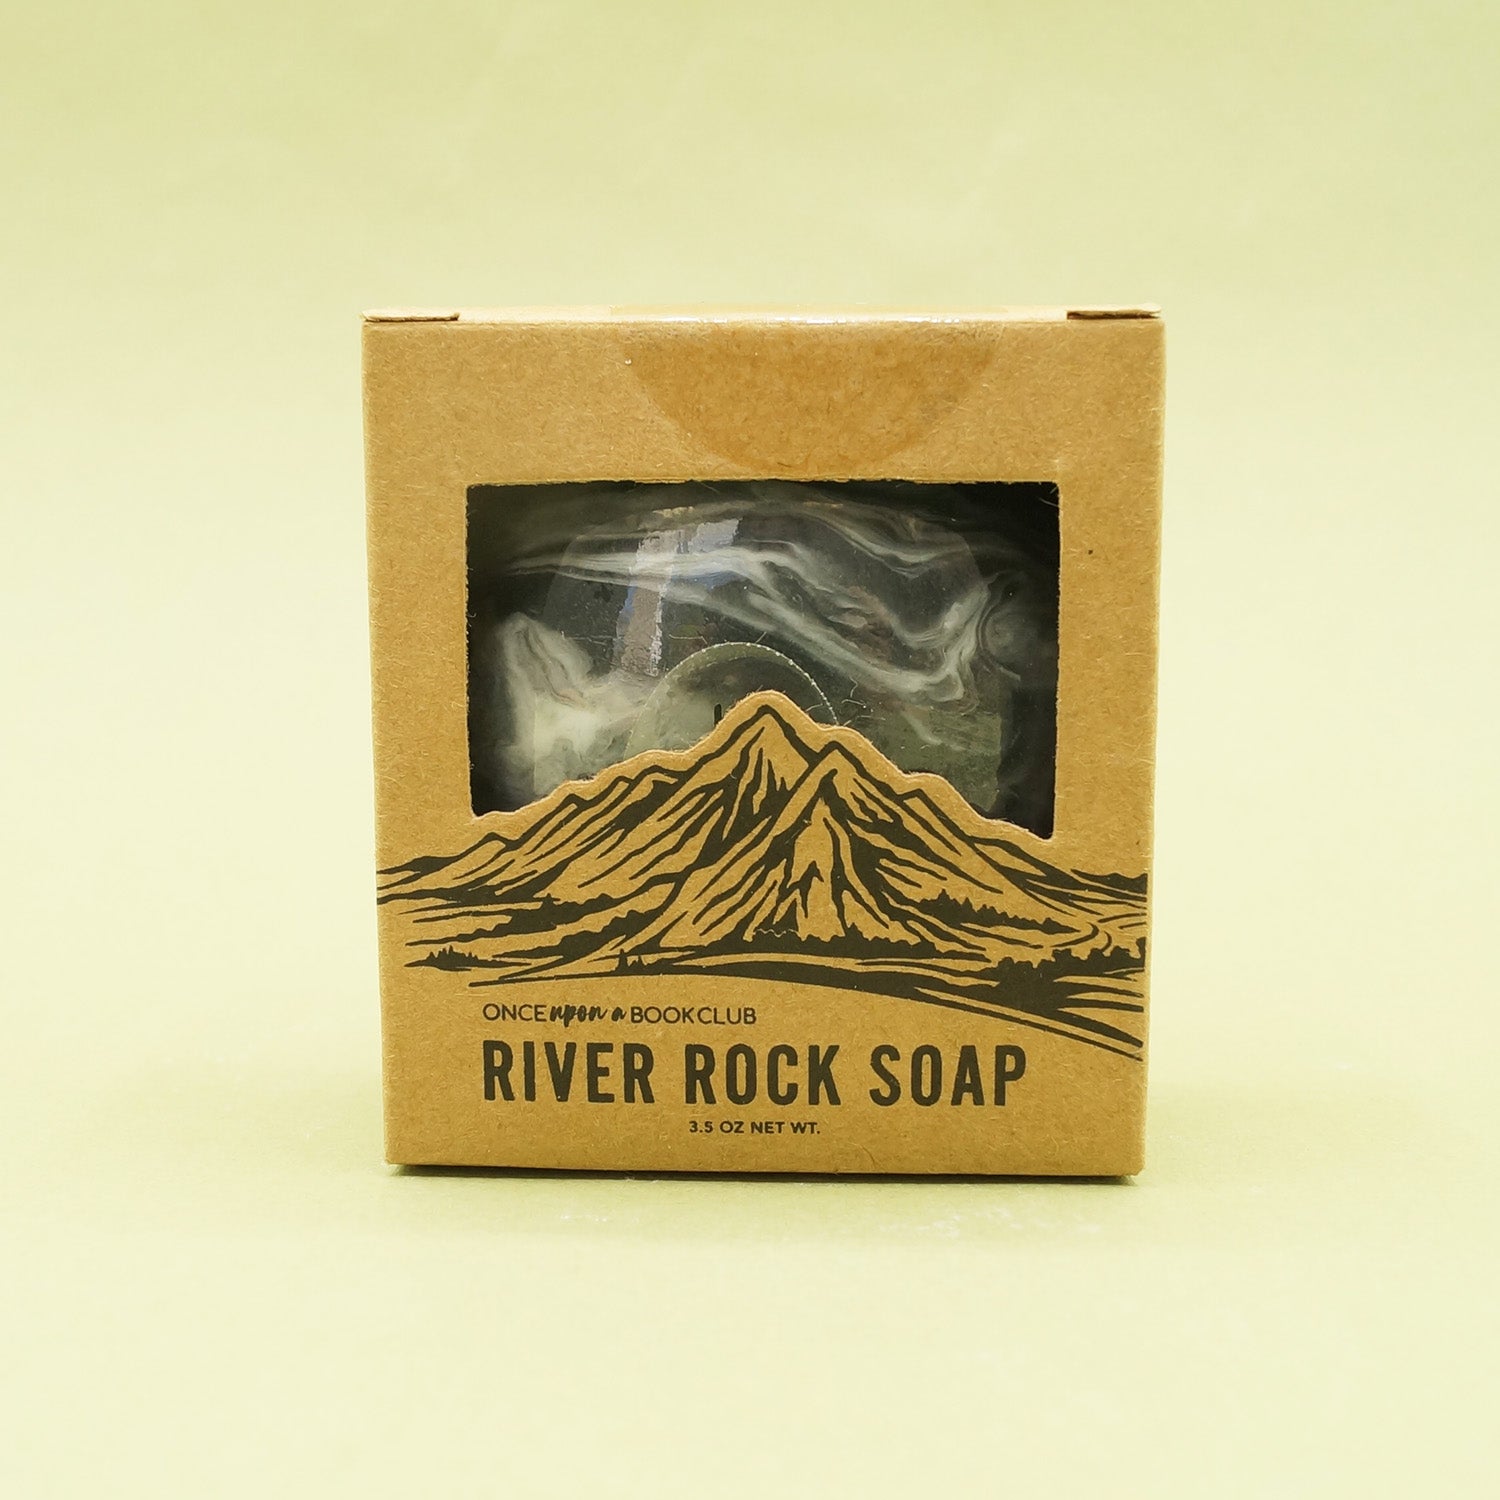 A brown box labeled River Rock Soap